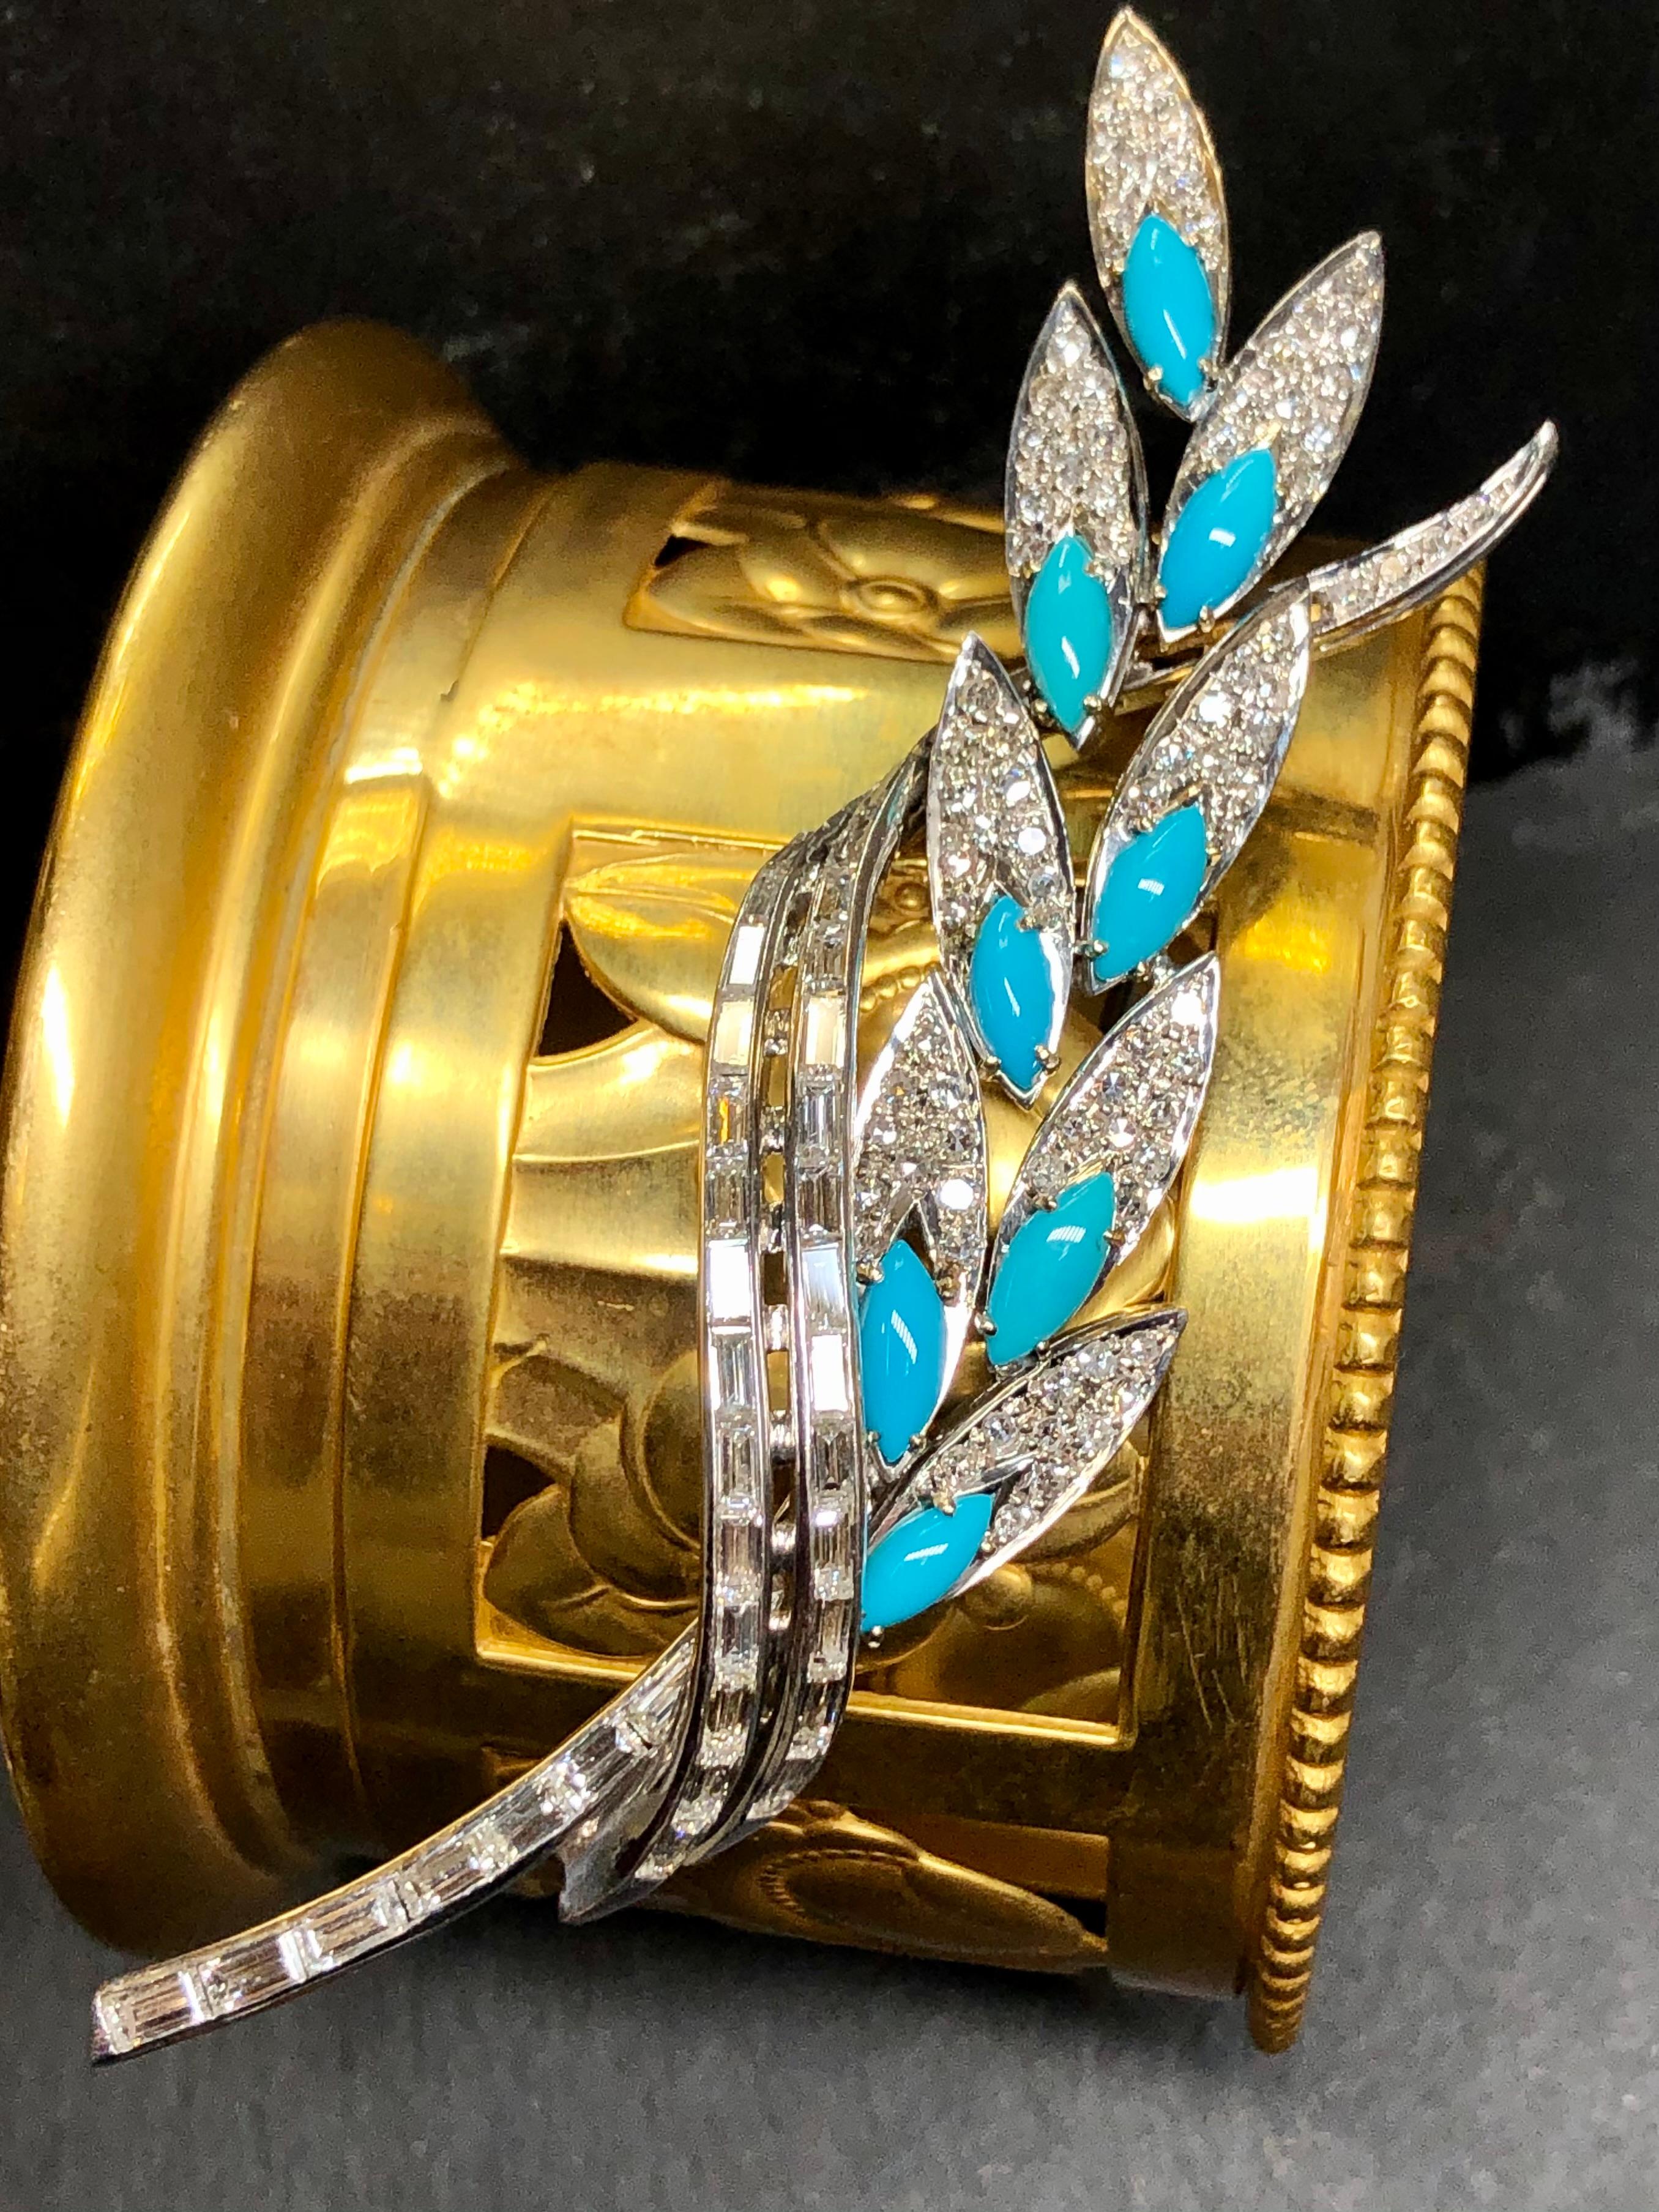 A stunner of a brooch c. 1950’s hand done in 18K white gold set with approximately 4.68cttw in baguettes as well as 1.68cttw in round cut diamonds and all stones are an impressive G-H color and Vs1 clarity. Each leaf is also prong set with natural